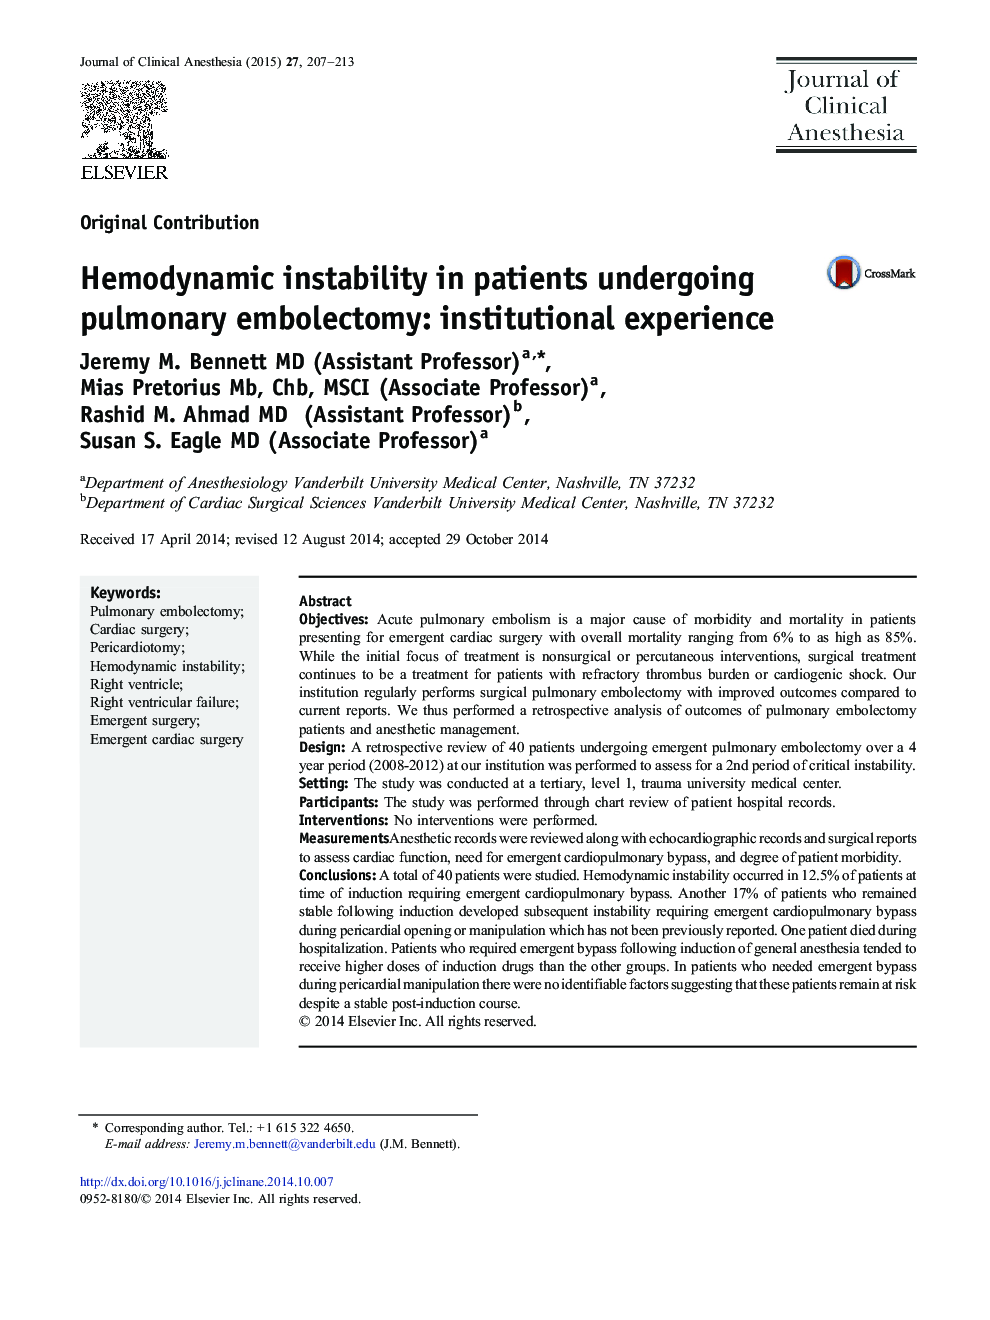 Hemodynamic instability in patients undergoing pulmonary embolectomy: institutional experience